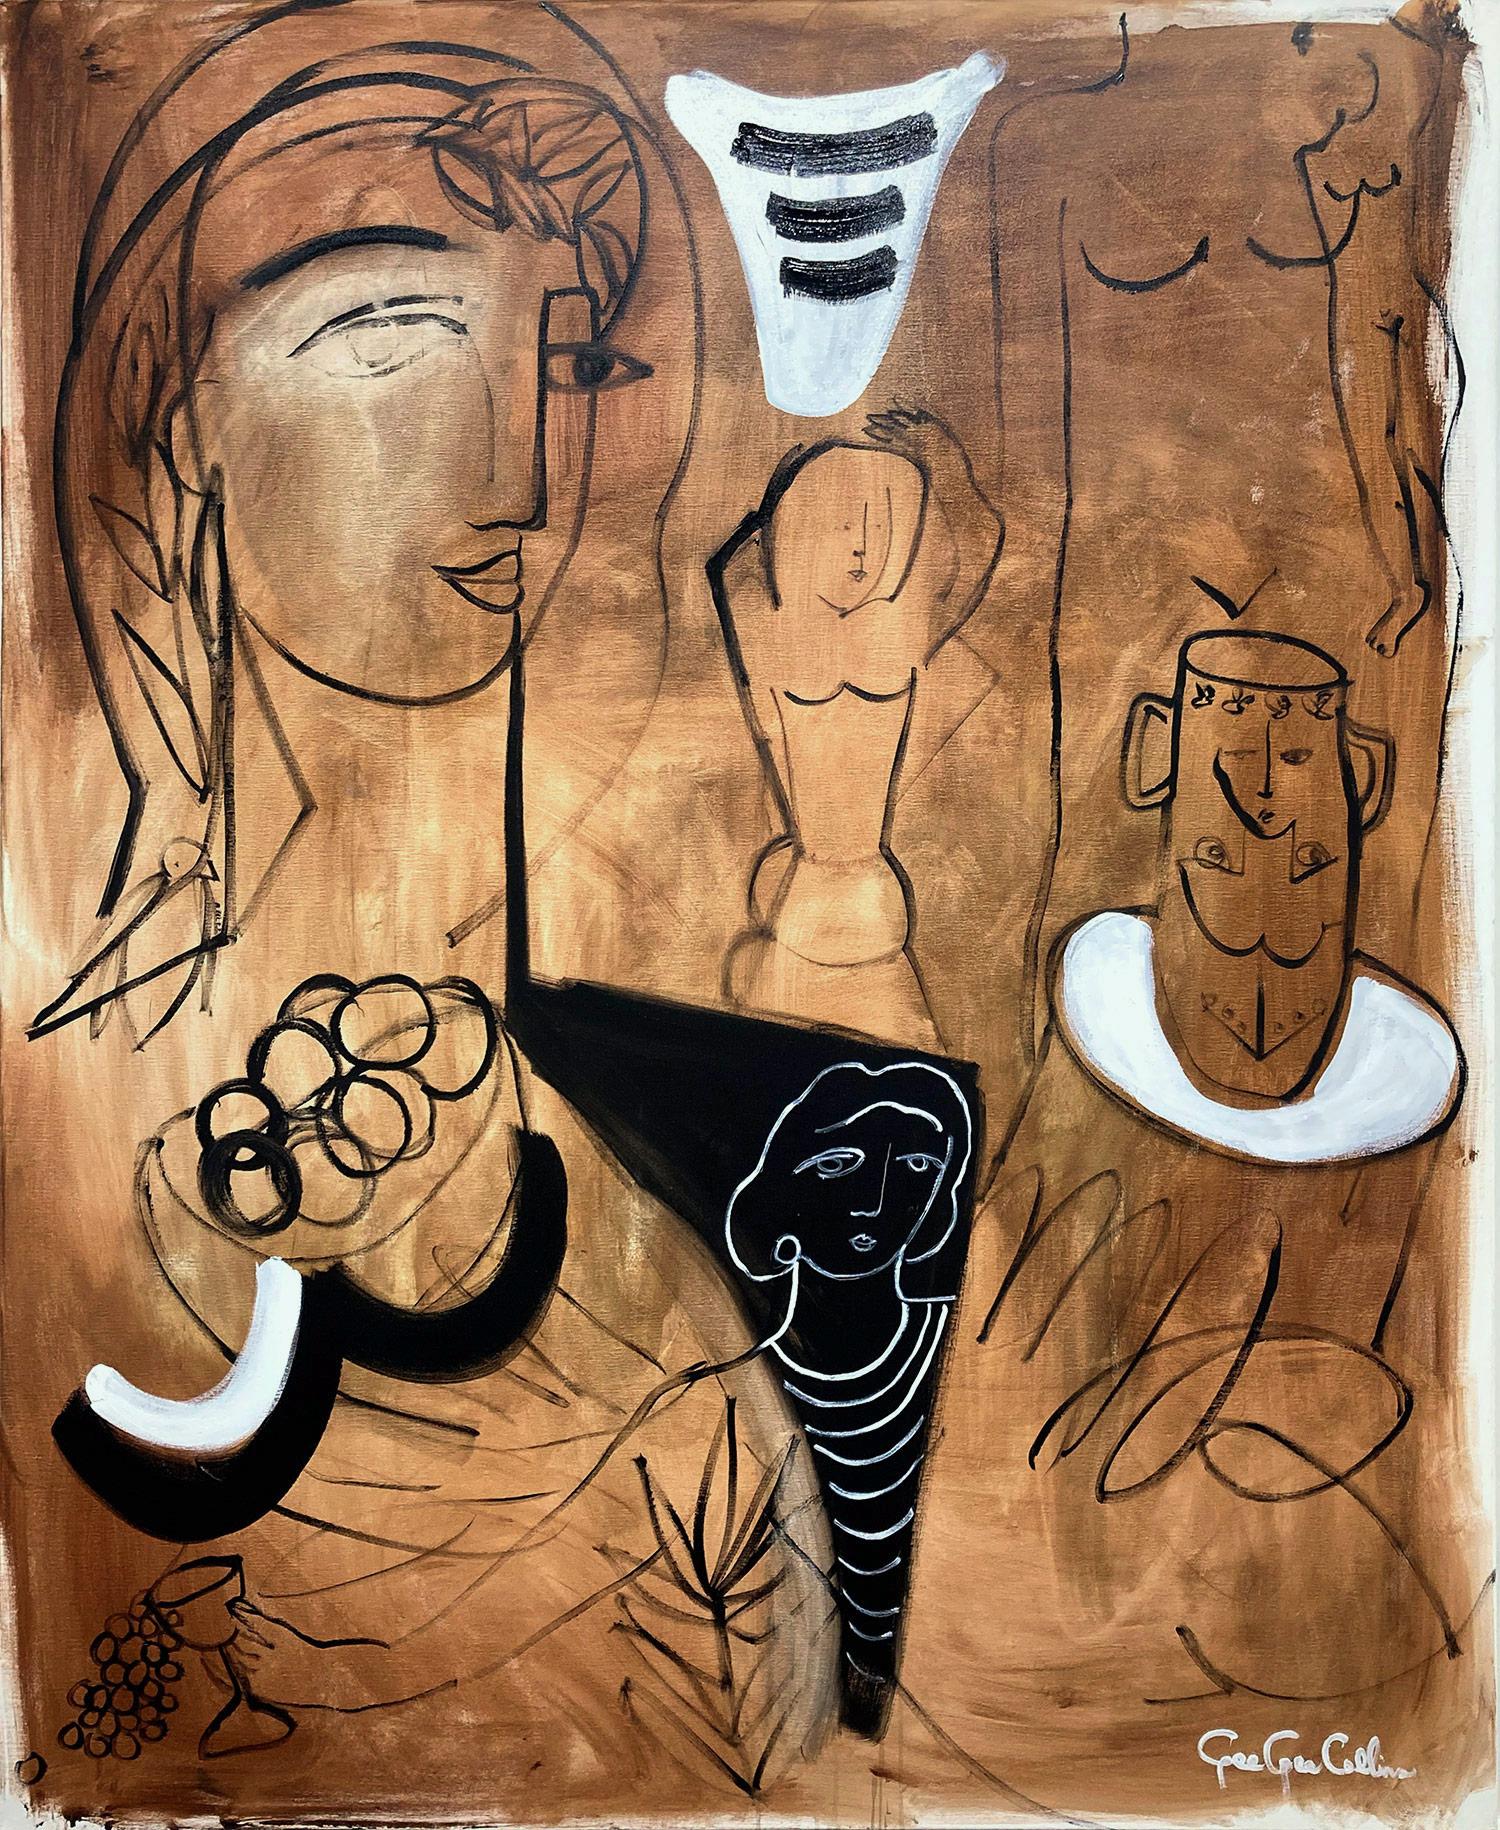 "The Black and White Egyptian Urn" Modernist Abstract Nudes Painting on Canvas